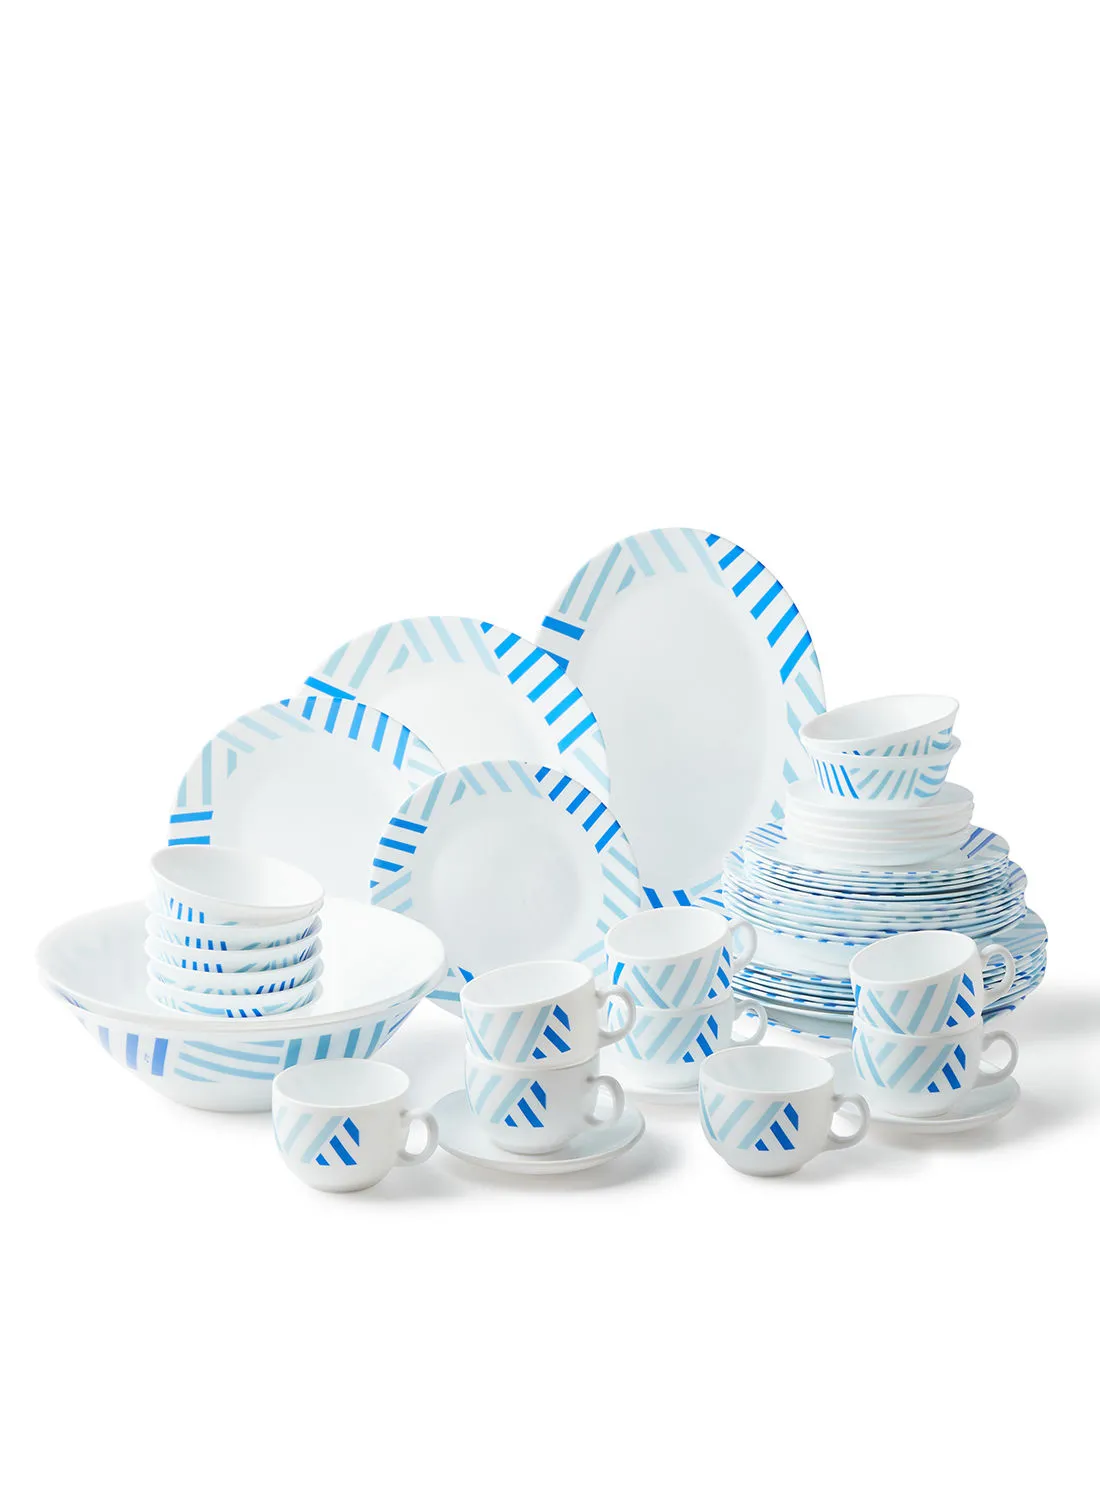 noon east 52 Piece Opalware Dinner Set For Everyday Use - Light Weight Dishes, Plates - Dinner Plate, Side Plate, Bowl, Cups, Serving Dish And Bowl - Serves 8 - Printed Design Denby